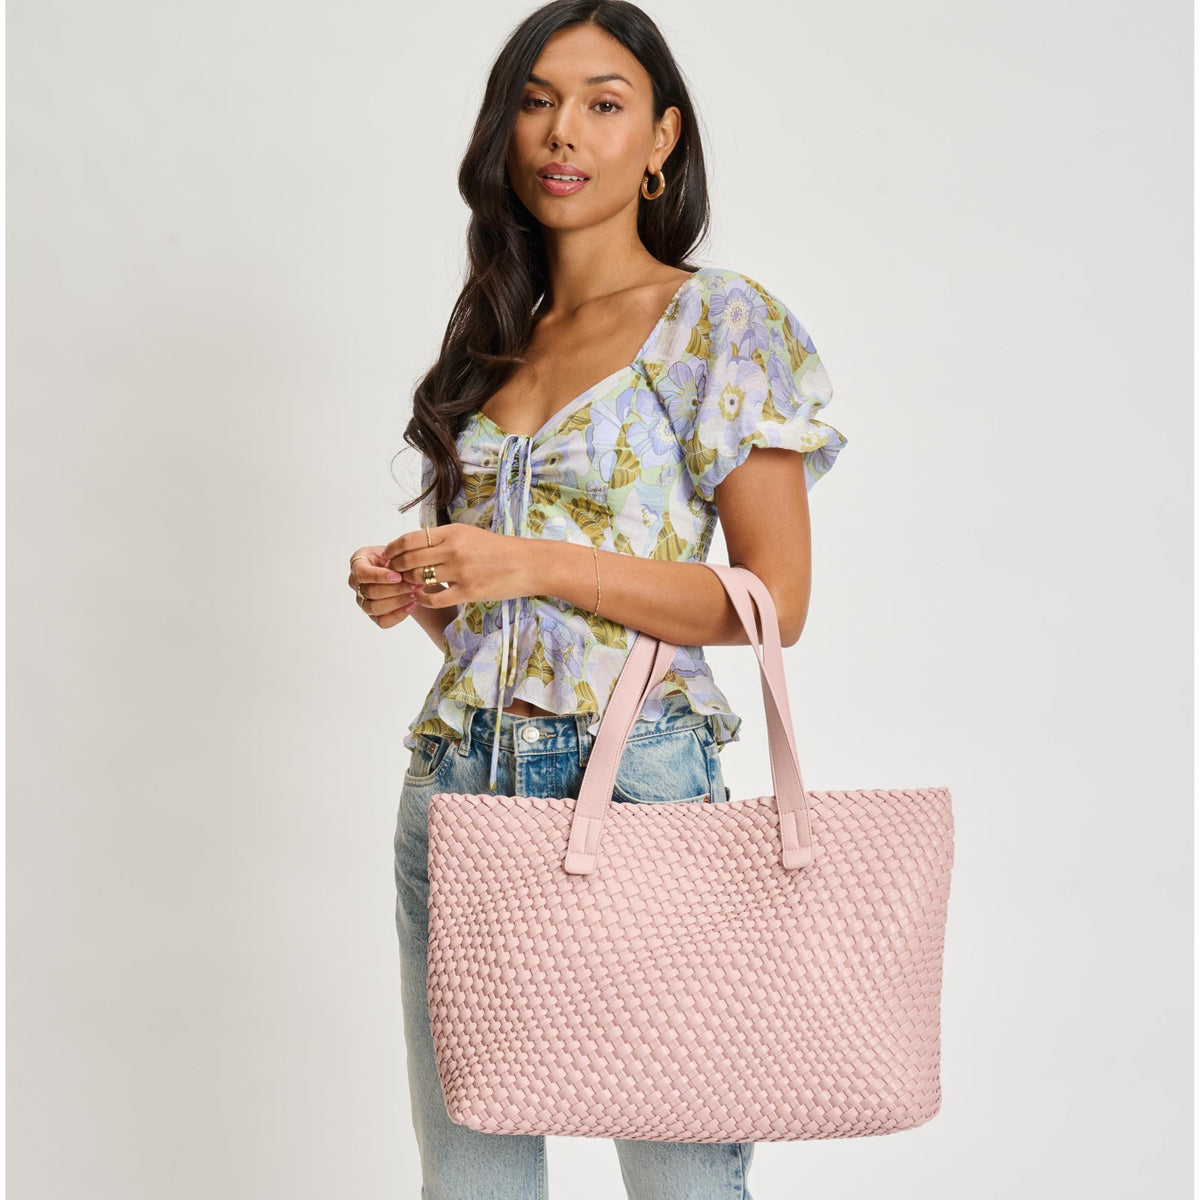 Woman wearing French Rose Moda Luxe Piquant Tote 842017135623 View 1 | French Rose